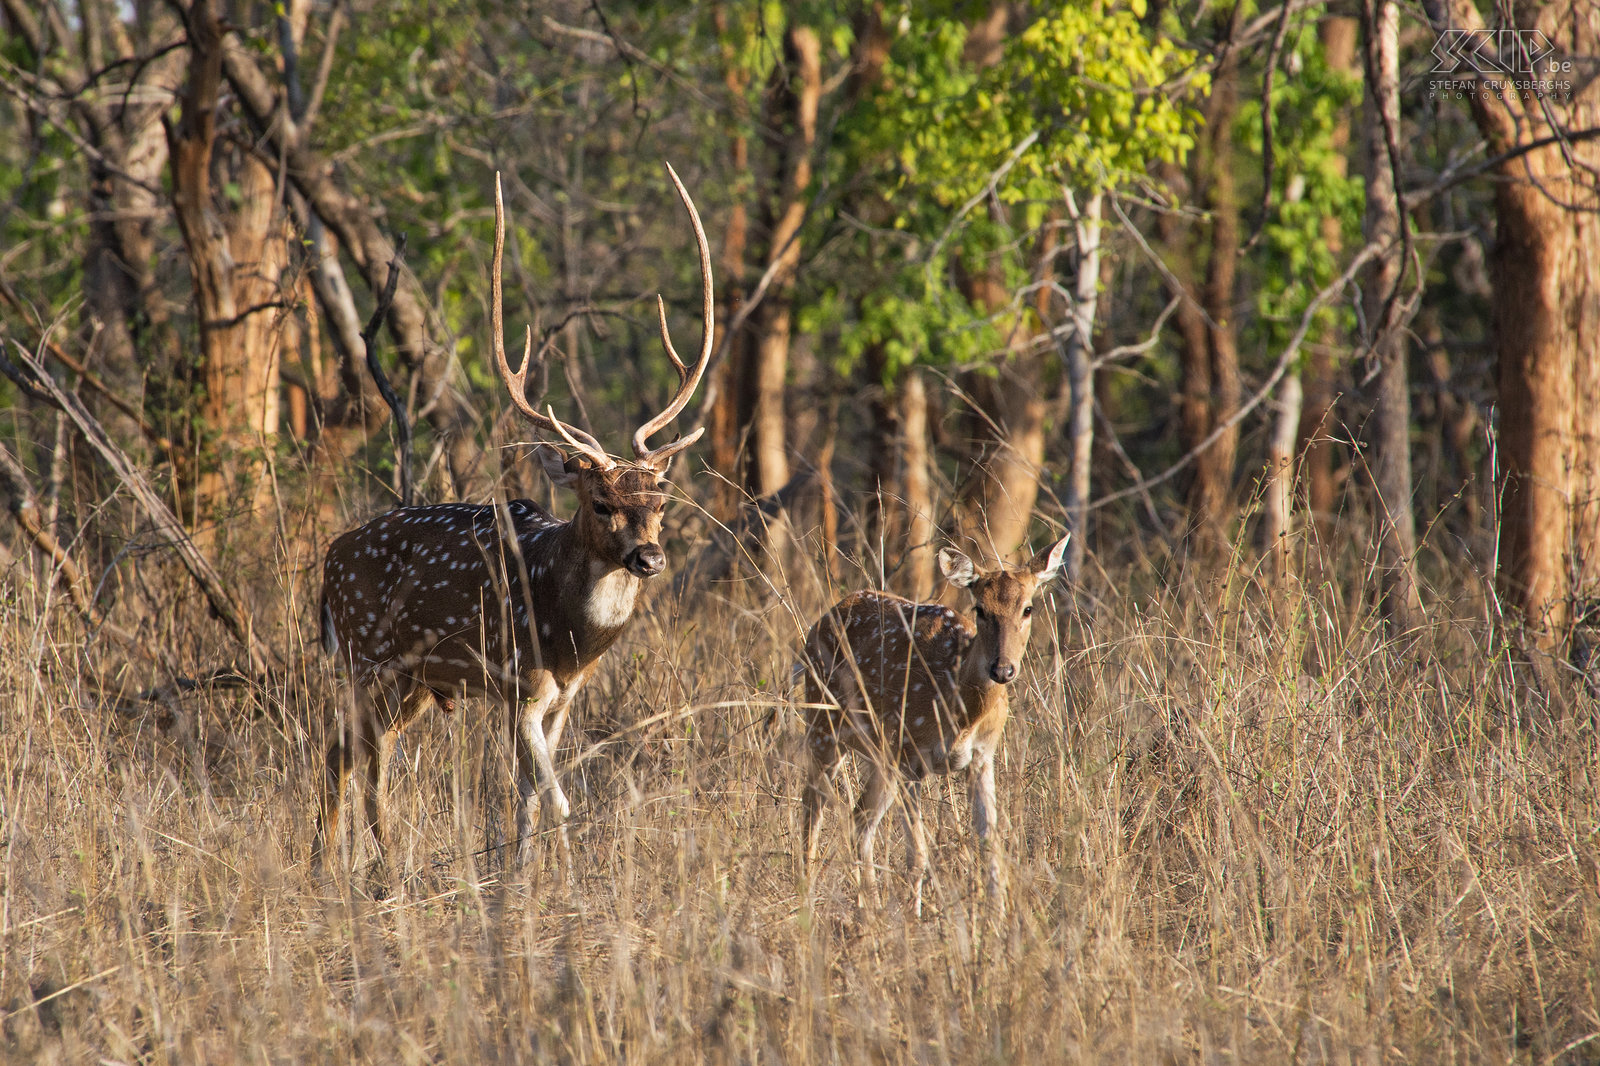 Panna - Spotted deers Spotted deers (Chital/Cheetal/Axis axis) are the most common deers in the Indian national parks. Stefan Cruysberghs